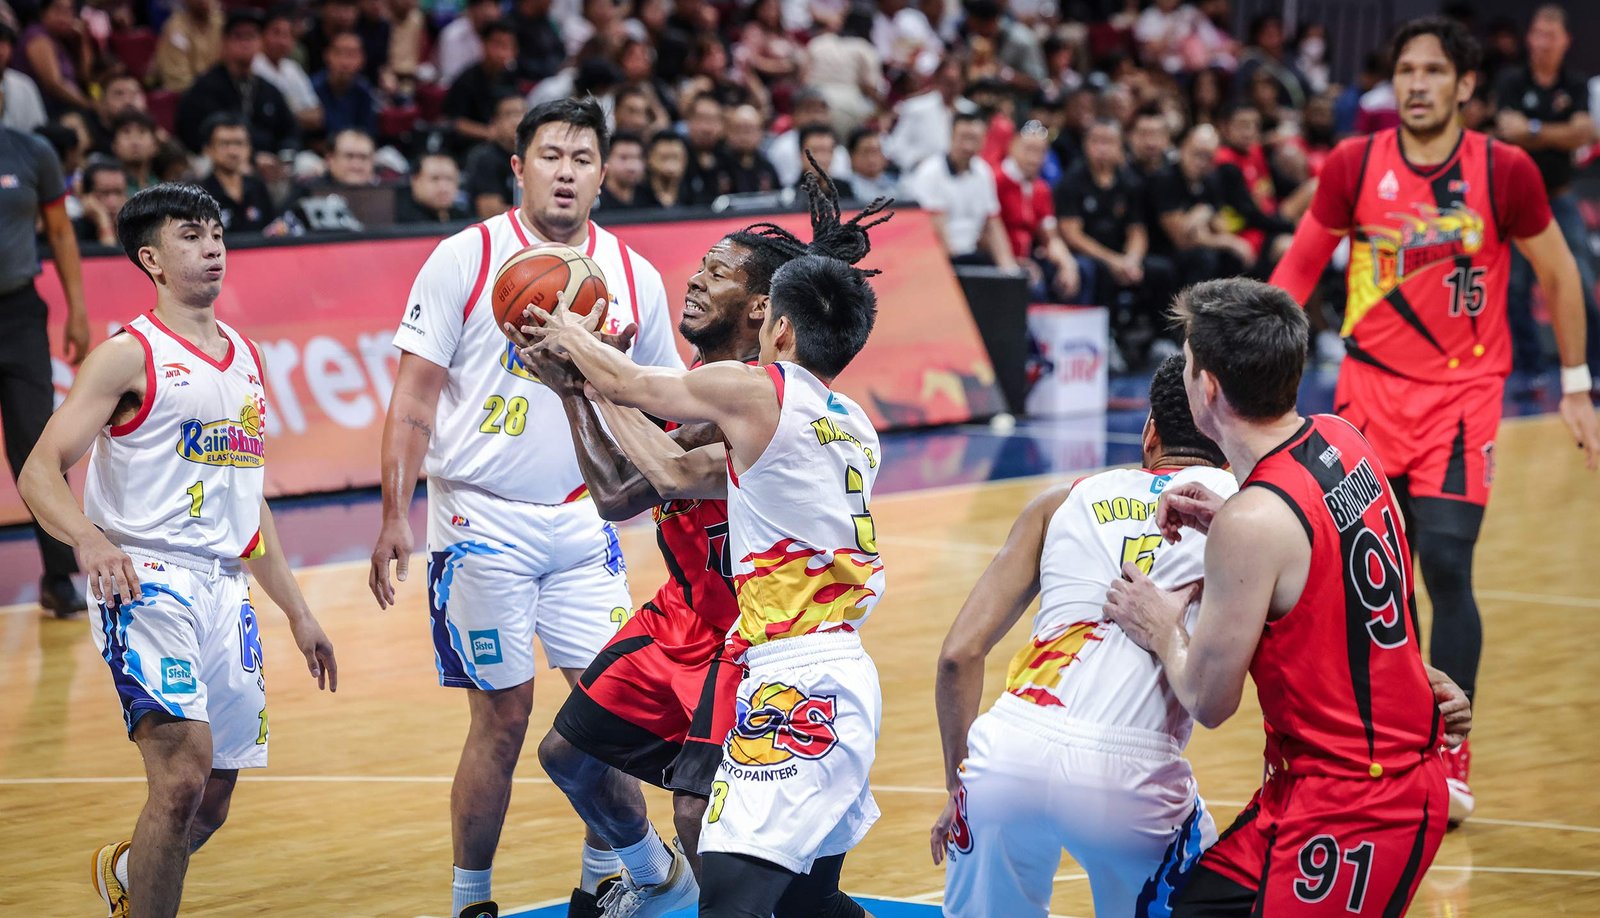 PBA: San Miguel ousts Rain or Shine to complete sweep, enter Finals